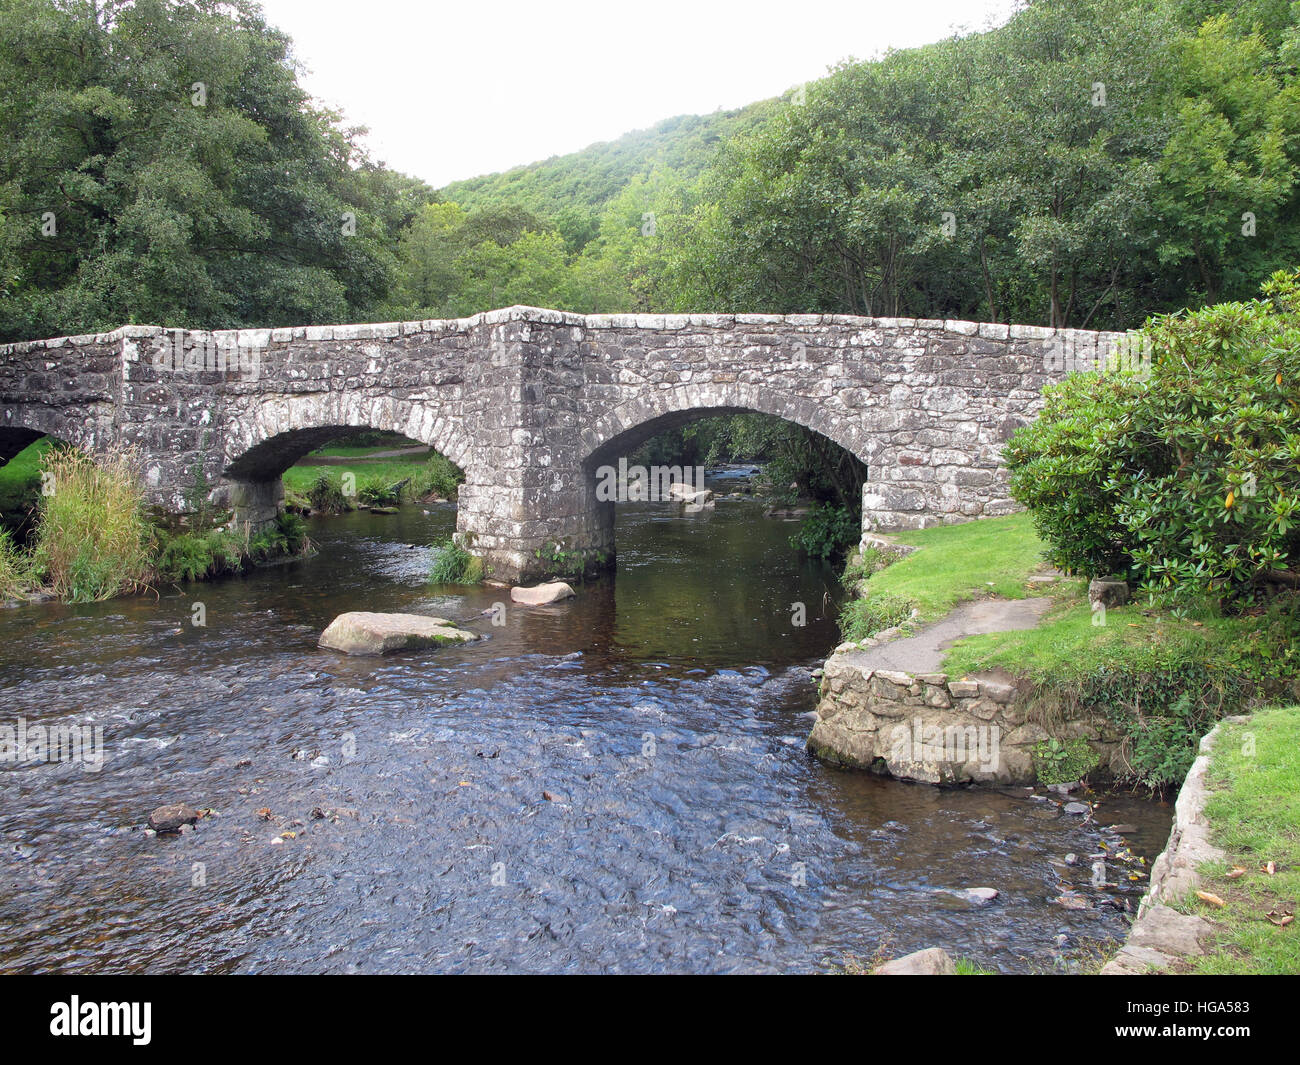 Old Stone bridge over a river in Exmoor National Park, Englamd Stock Photo